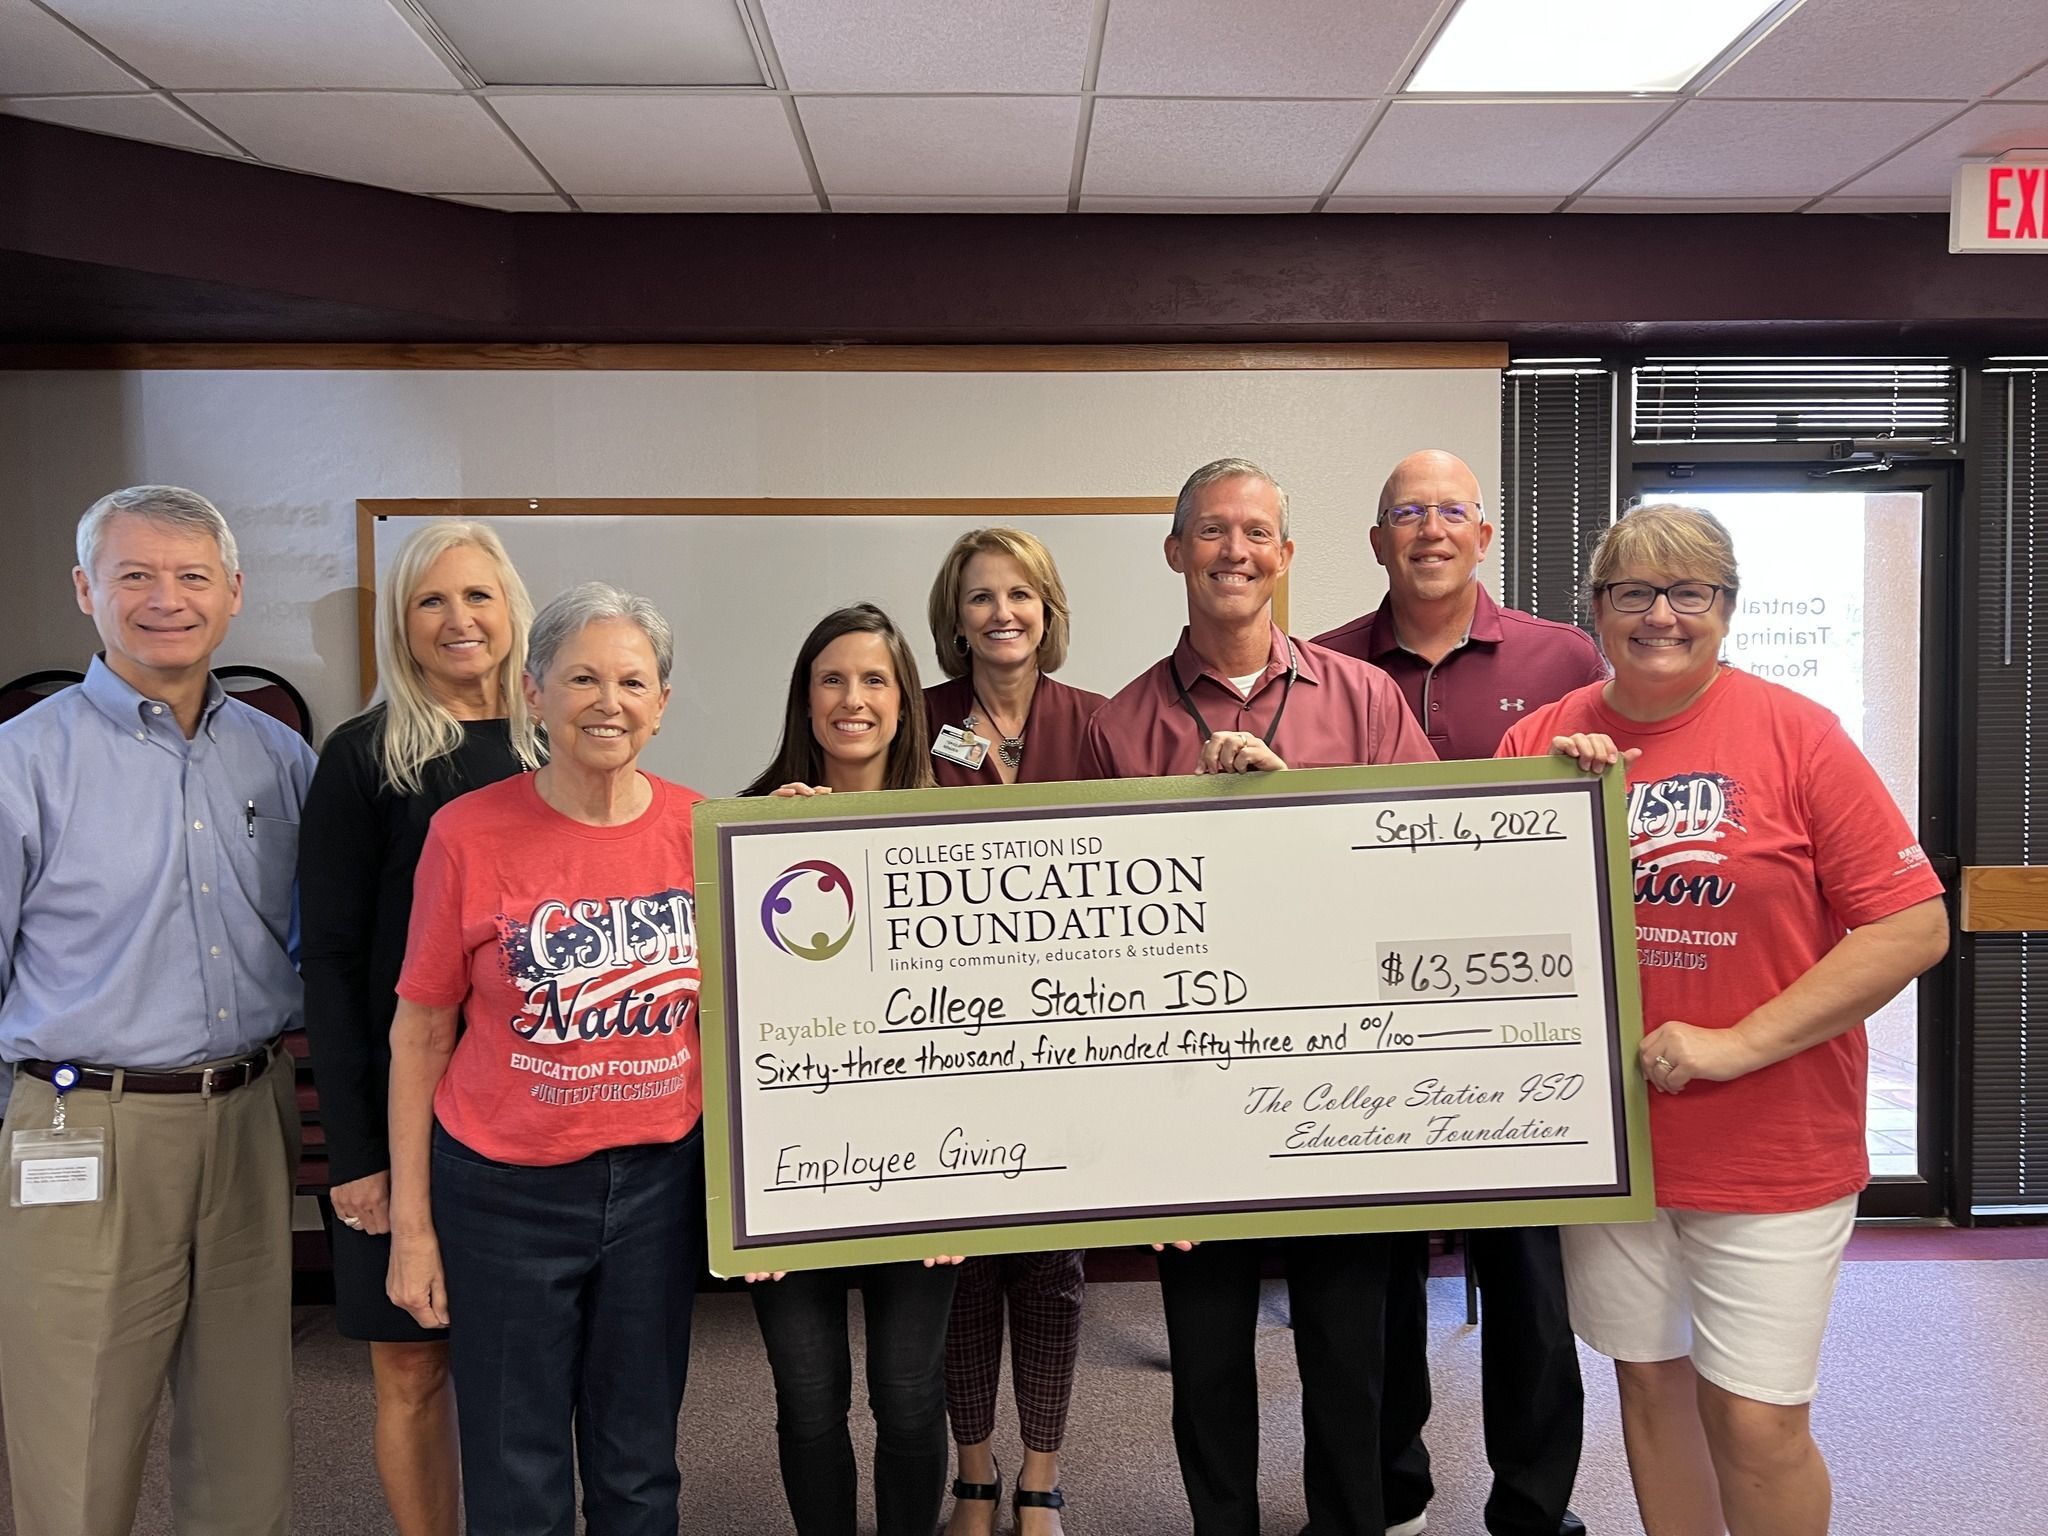 EF Board of Directors presents a check for money raised during the Employee Giving Campaign